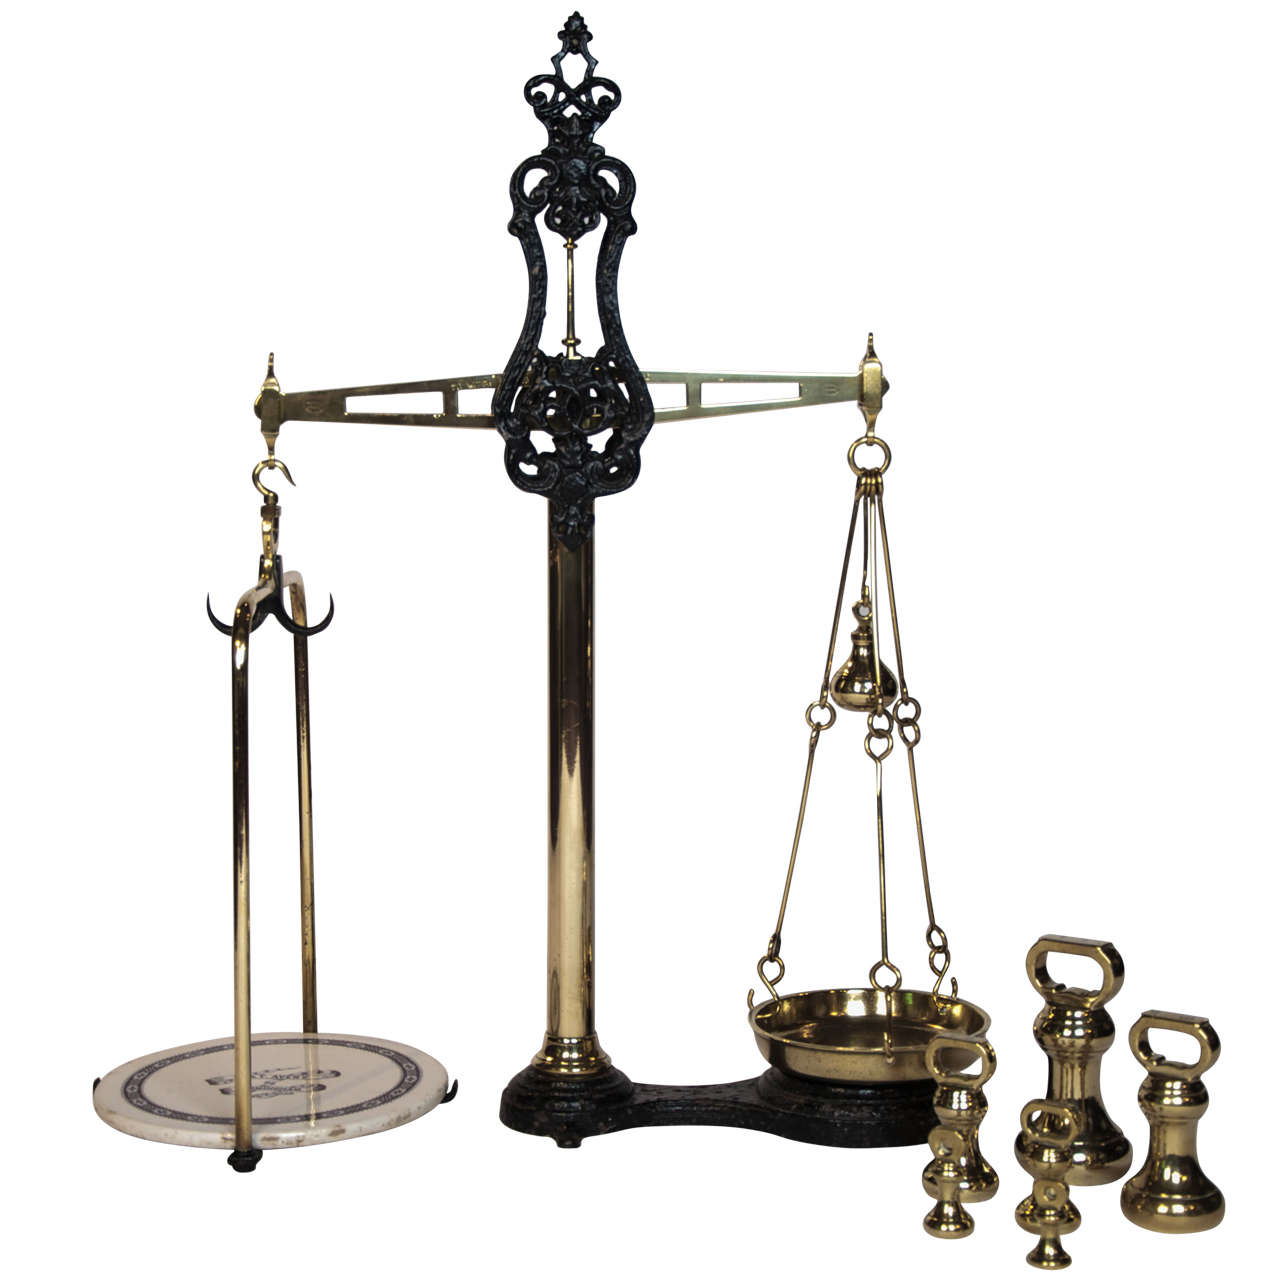 Set of Victorian Weighing Scales by W&T Avery of Birmingham